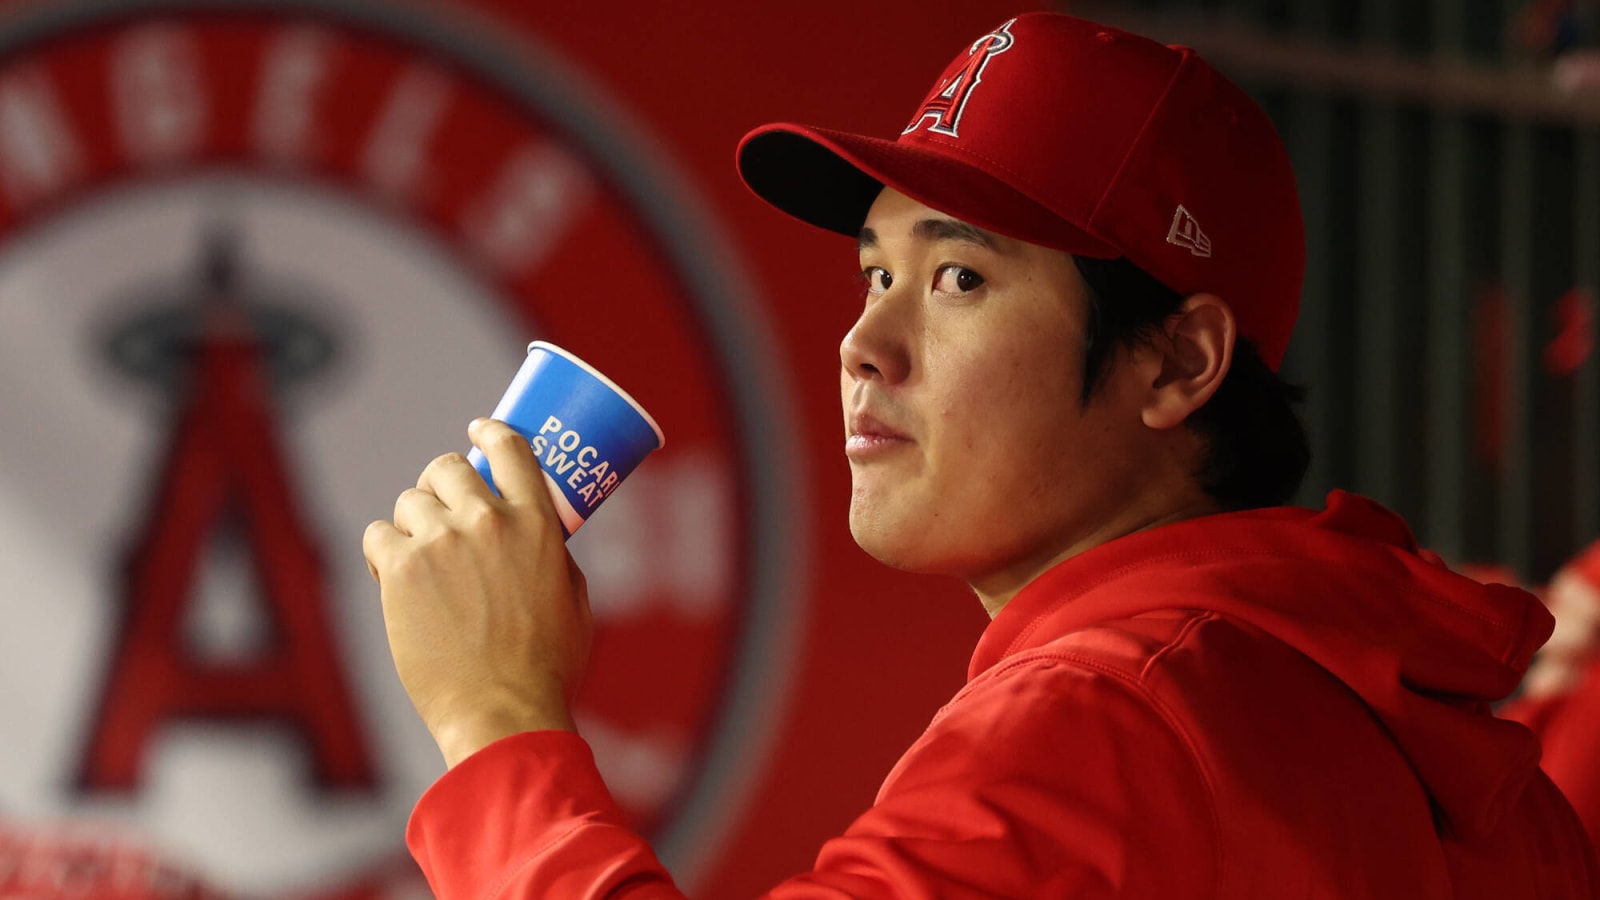 Shohei Ohtani: Should this team currently have the best odds to sign him?